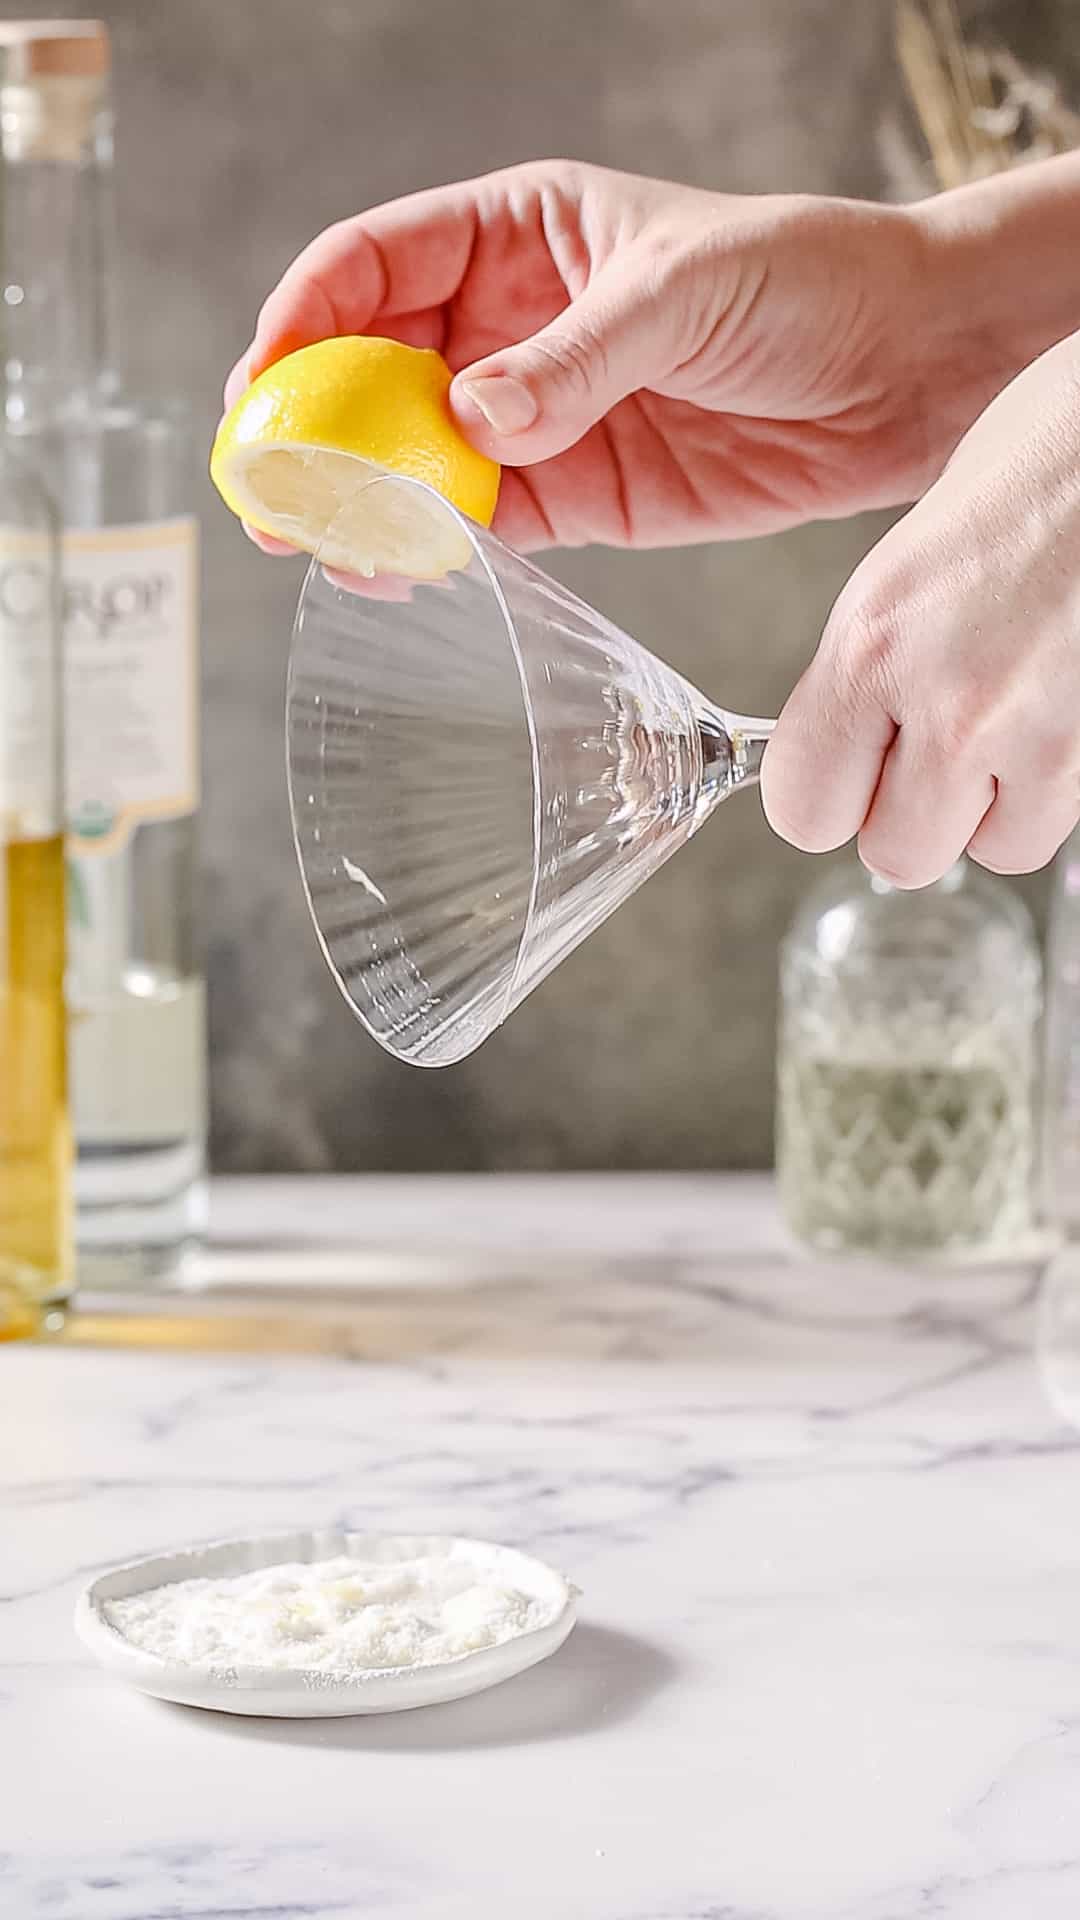 Hand using a cut lemon to wet the rim of a large martini glass.